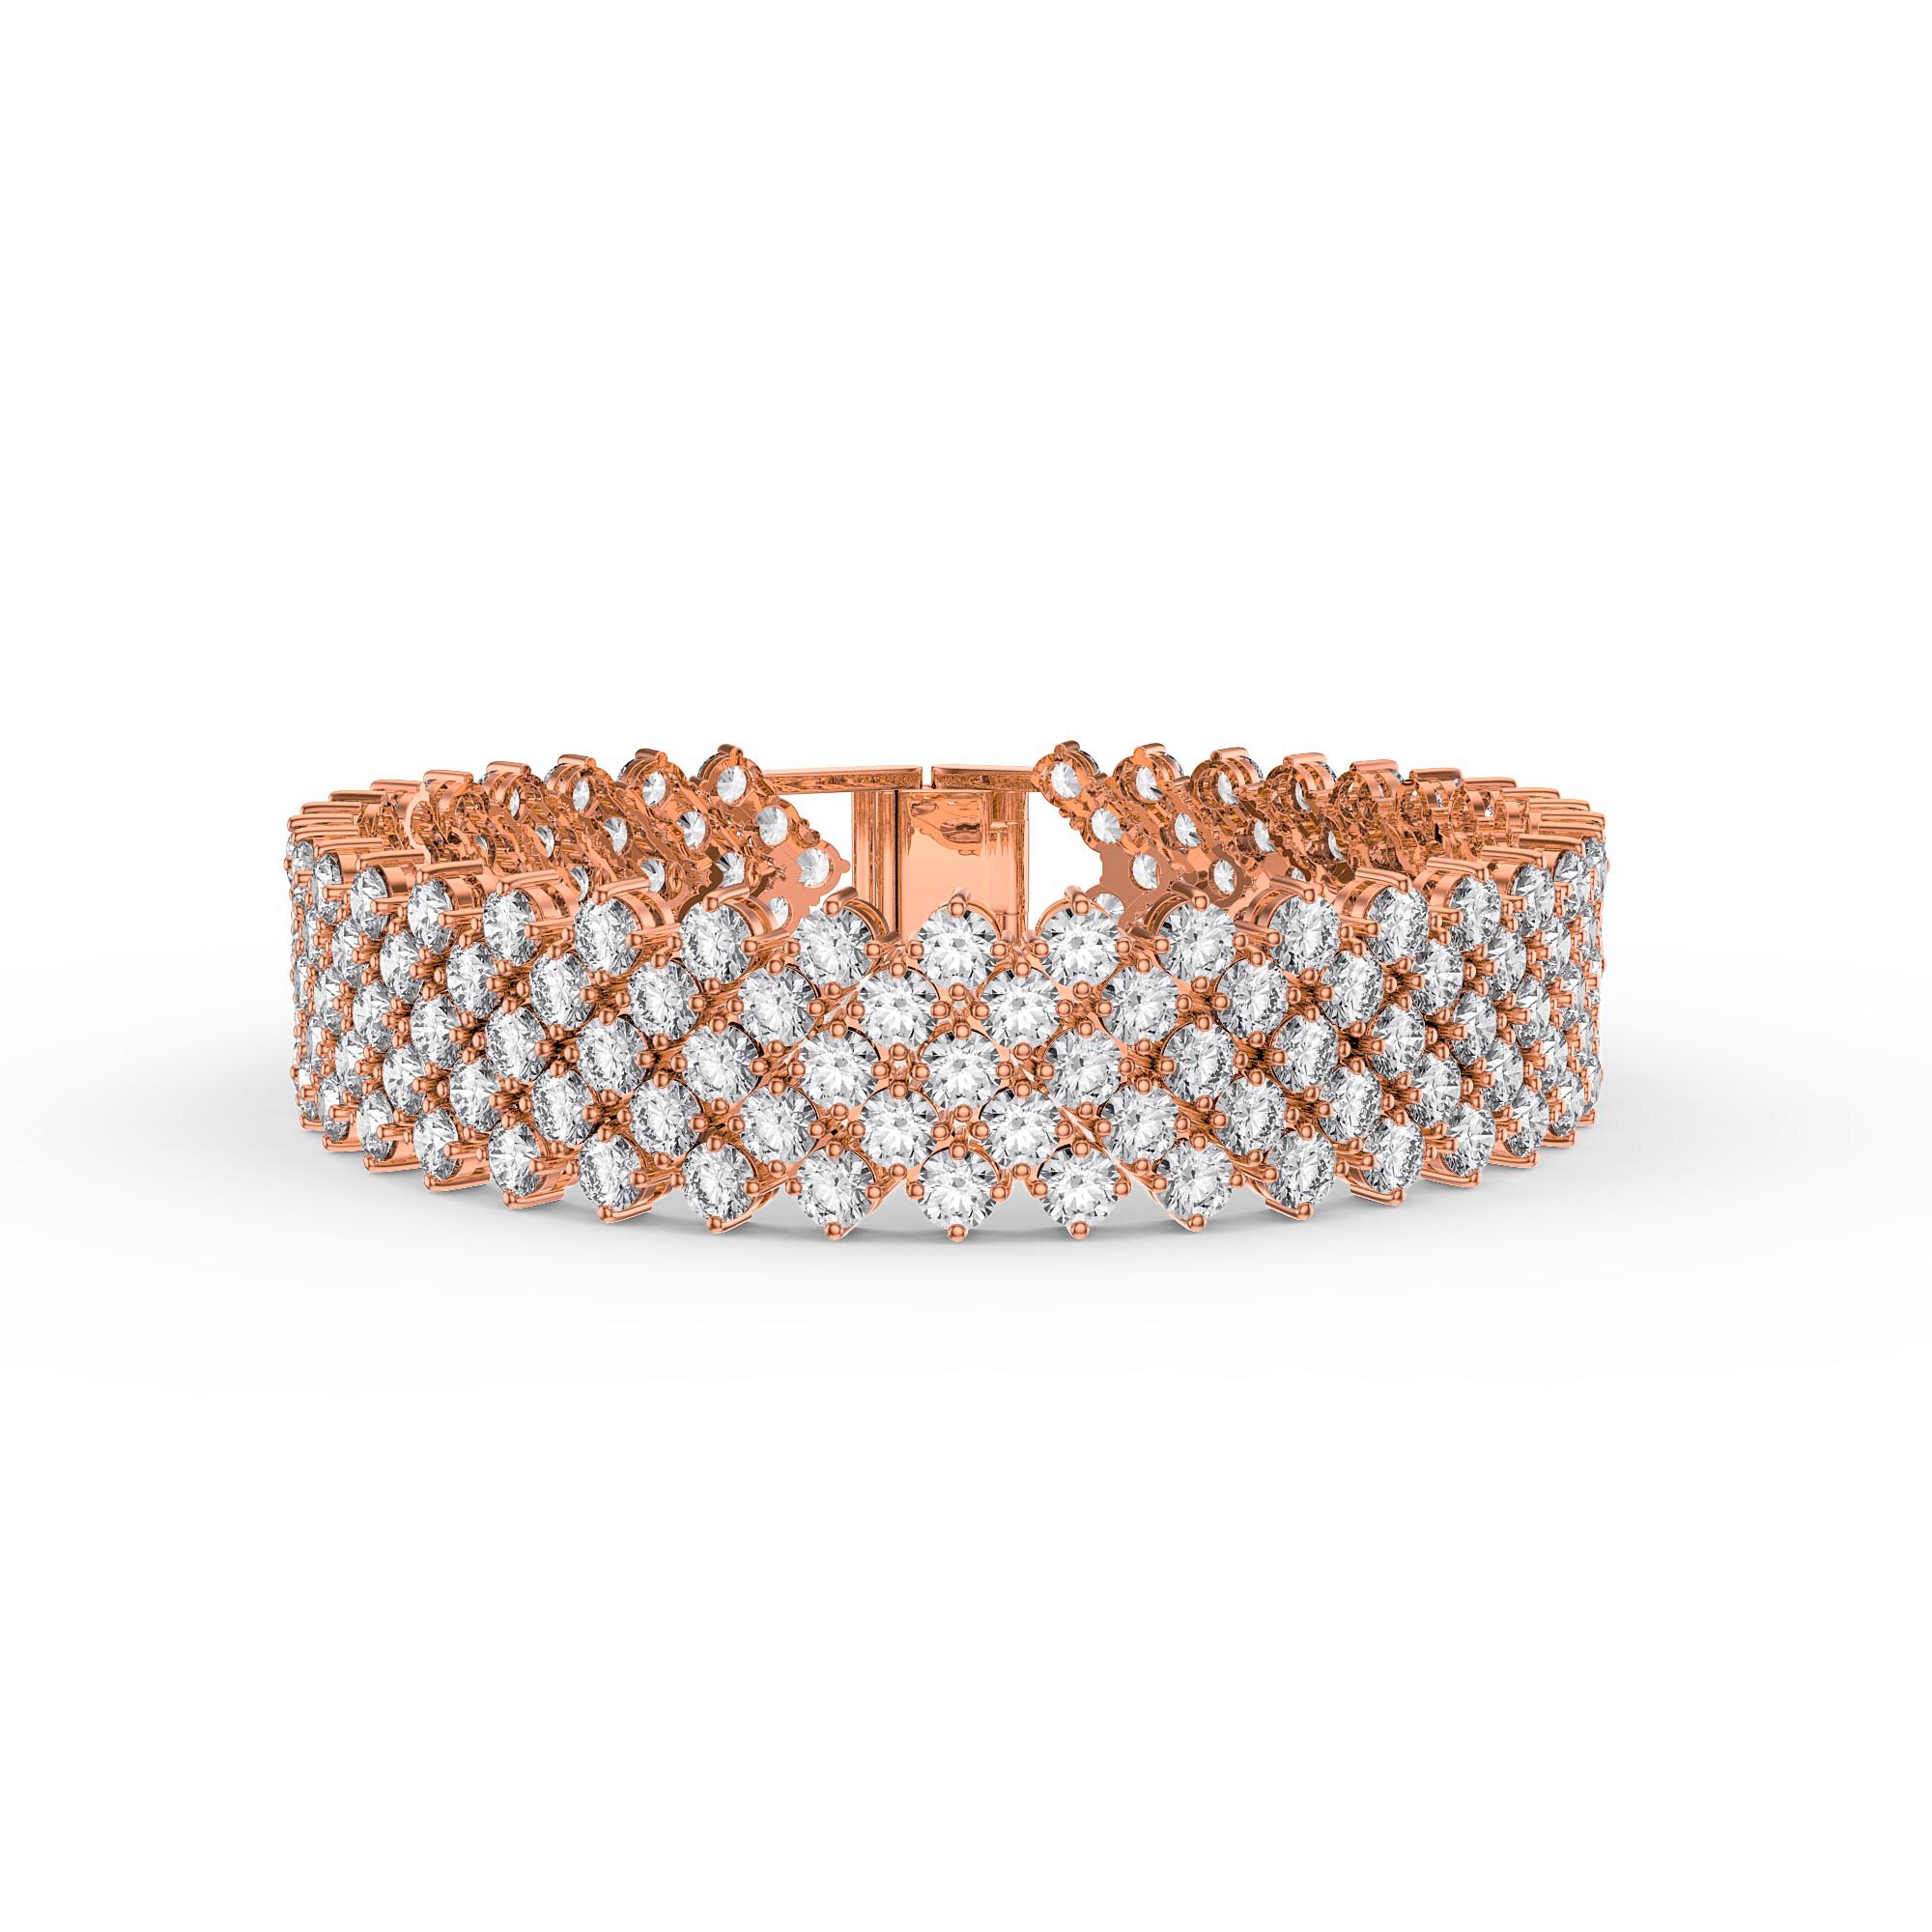 Woven Rose Gold Vermeil Bracelet By Milor Italy  PreAdored Sustainable  Luxury